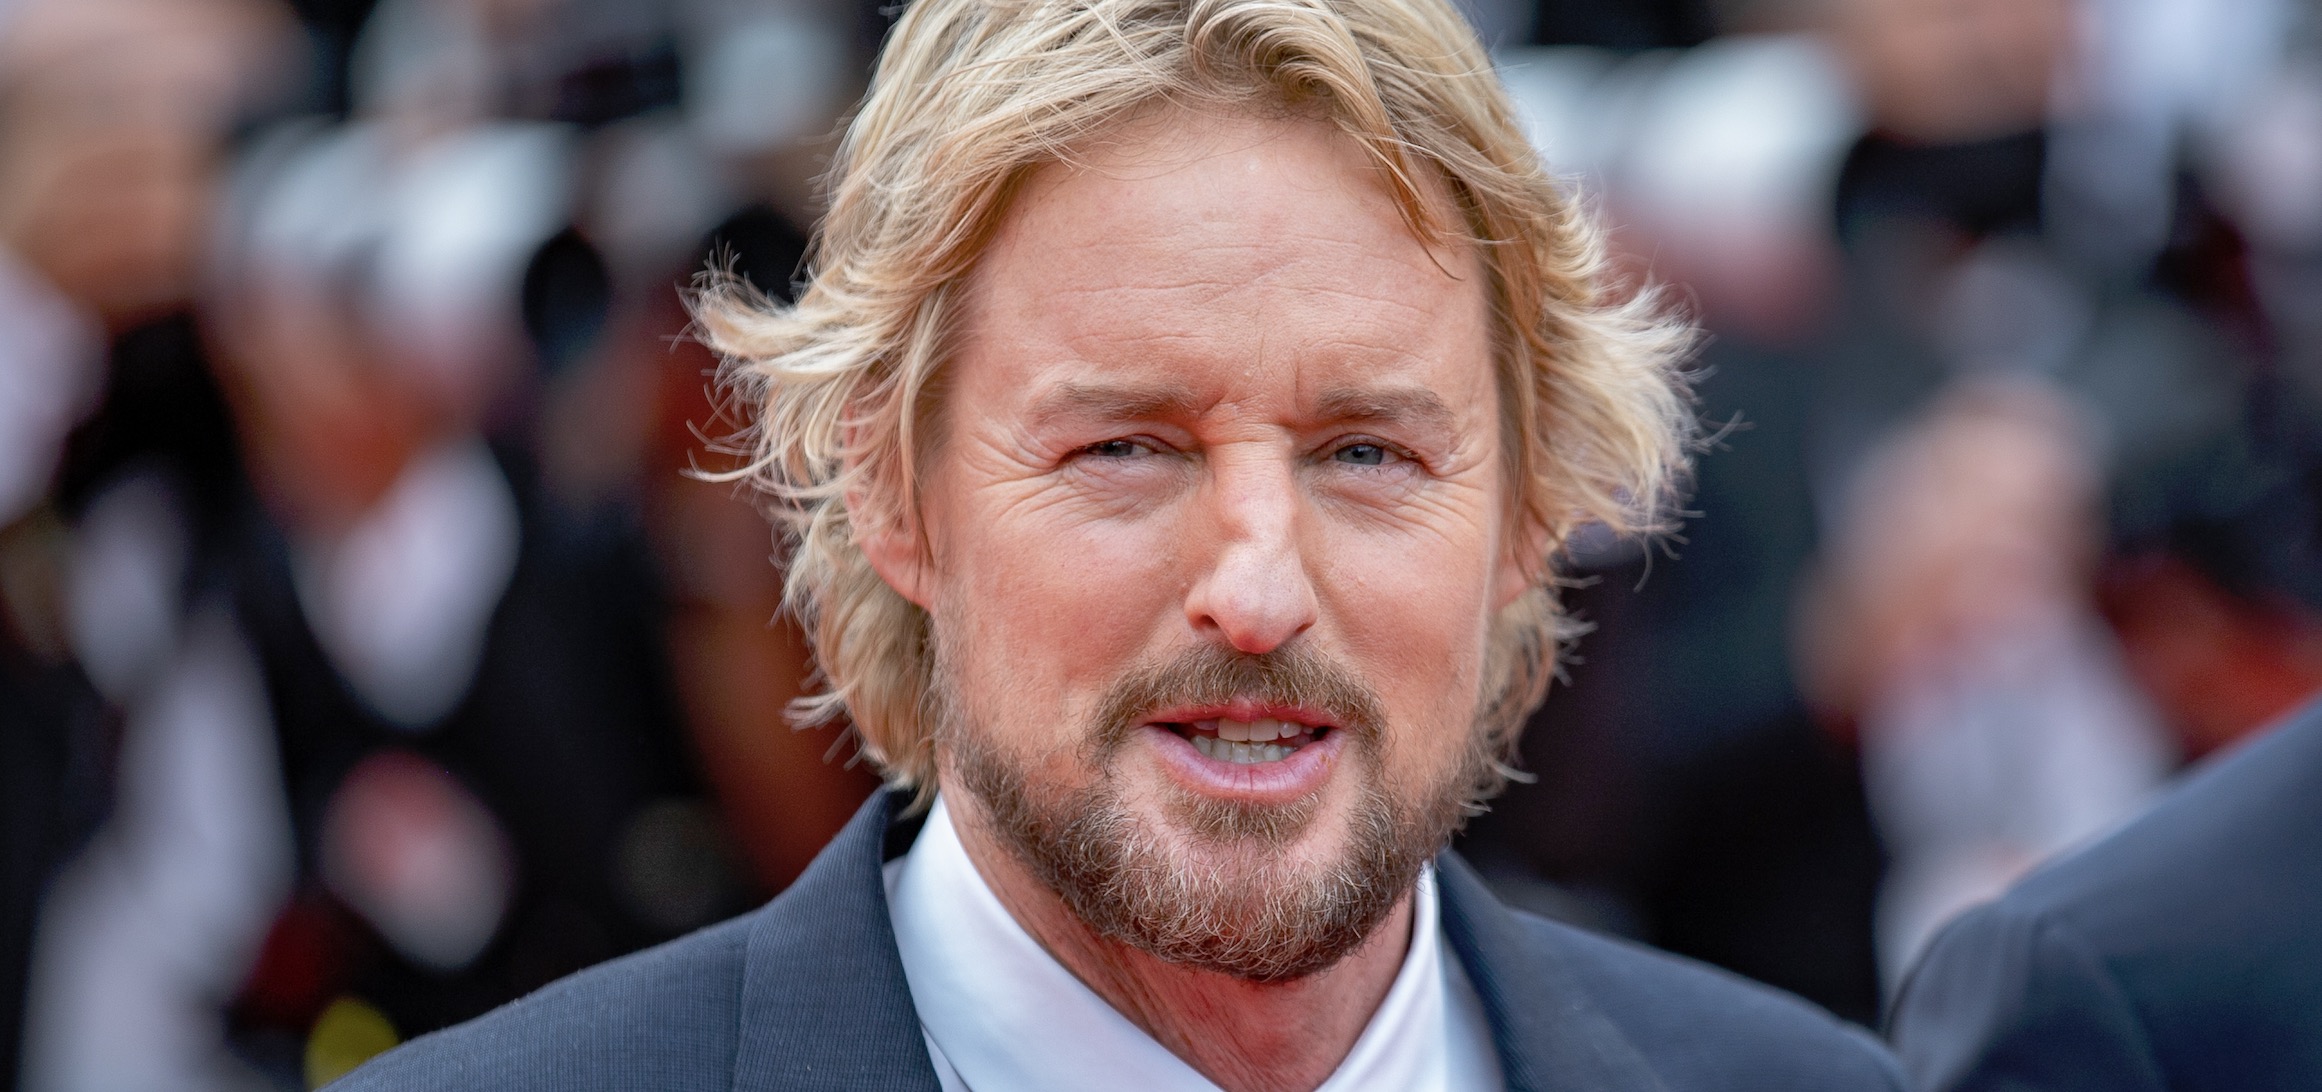 Owen Wilson Turned Down *So* Much Money To Reject An O.J. Simpson Movie Where The Juice Is Innocent